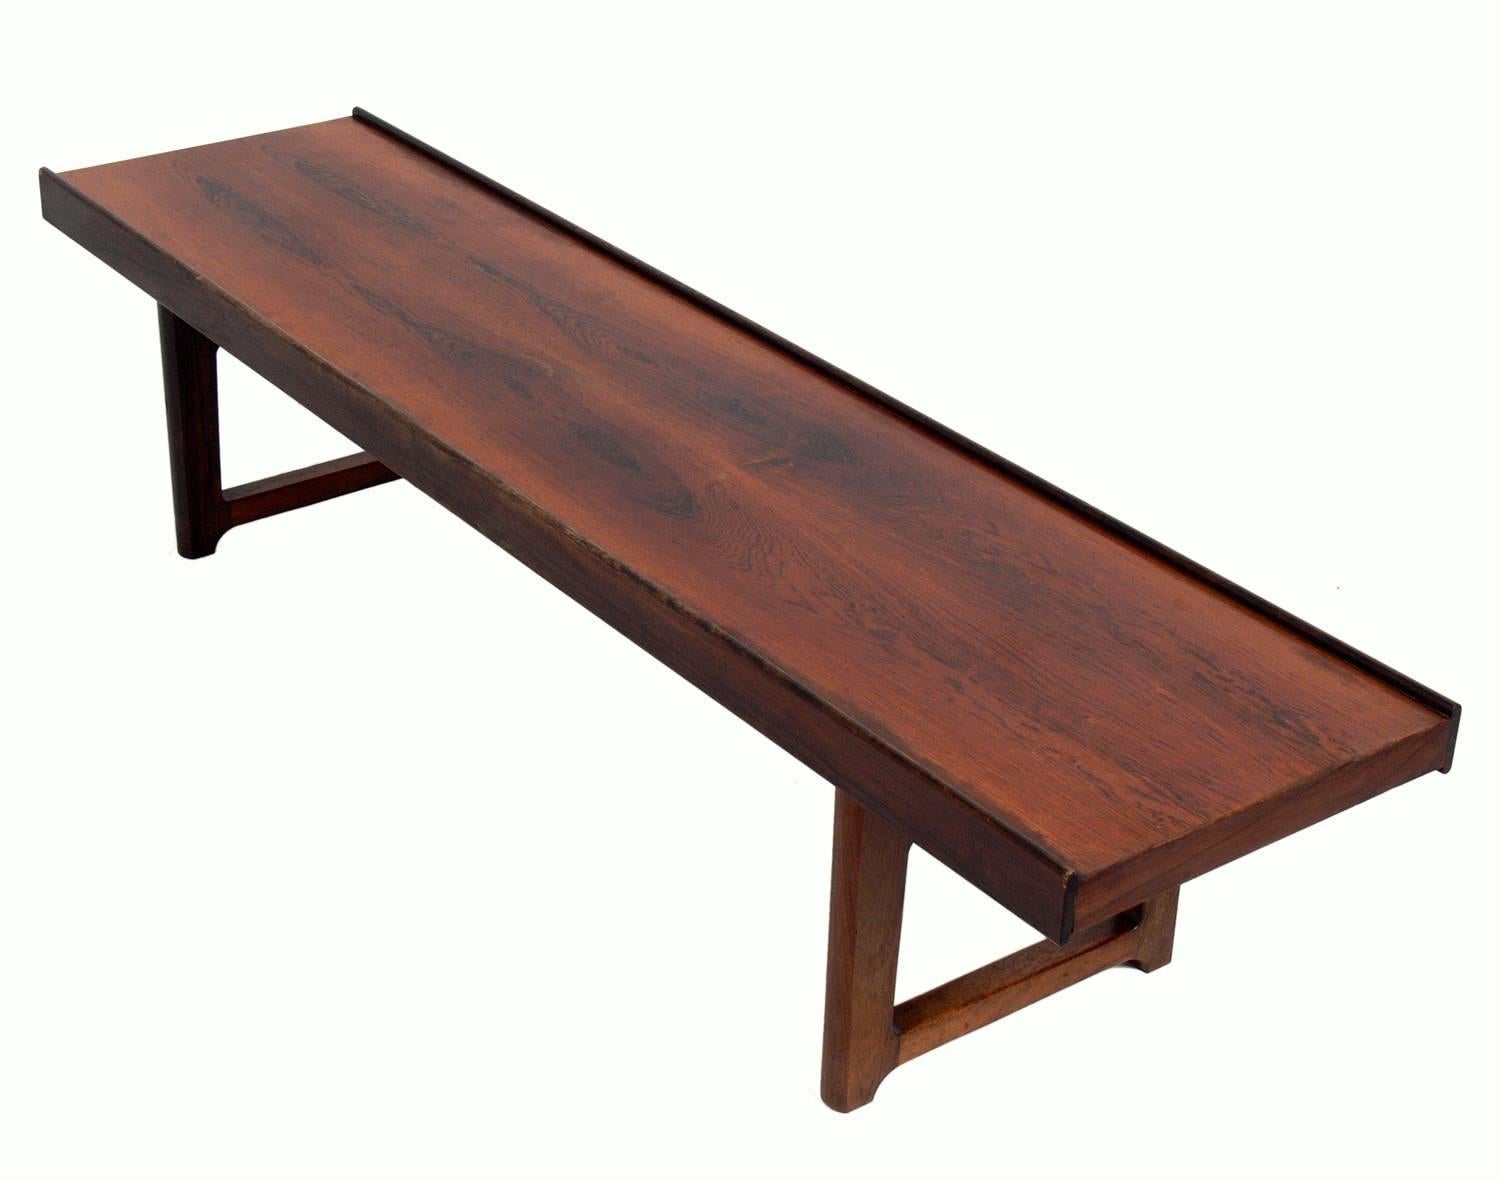 Mid-20th Century Danish Modern Rosewood Bench or Table by Bruksbo